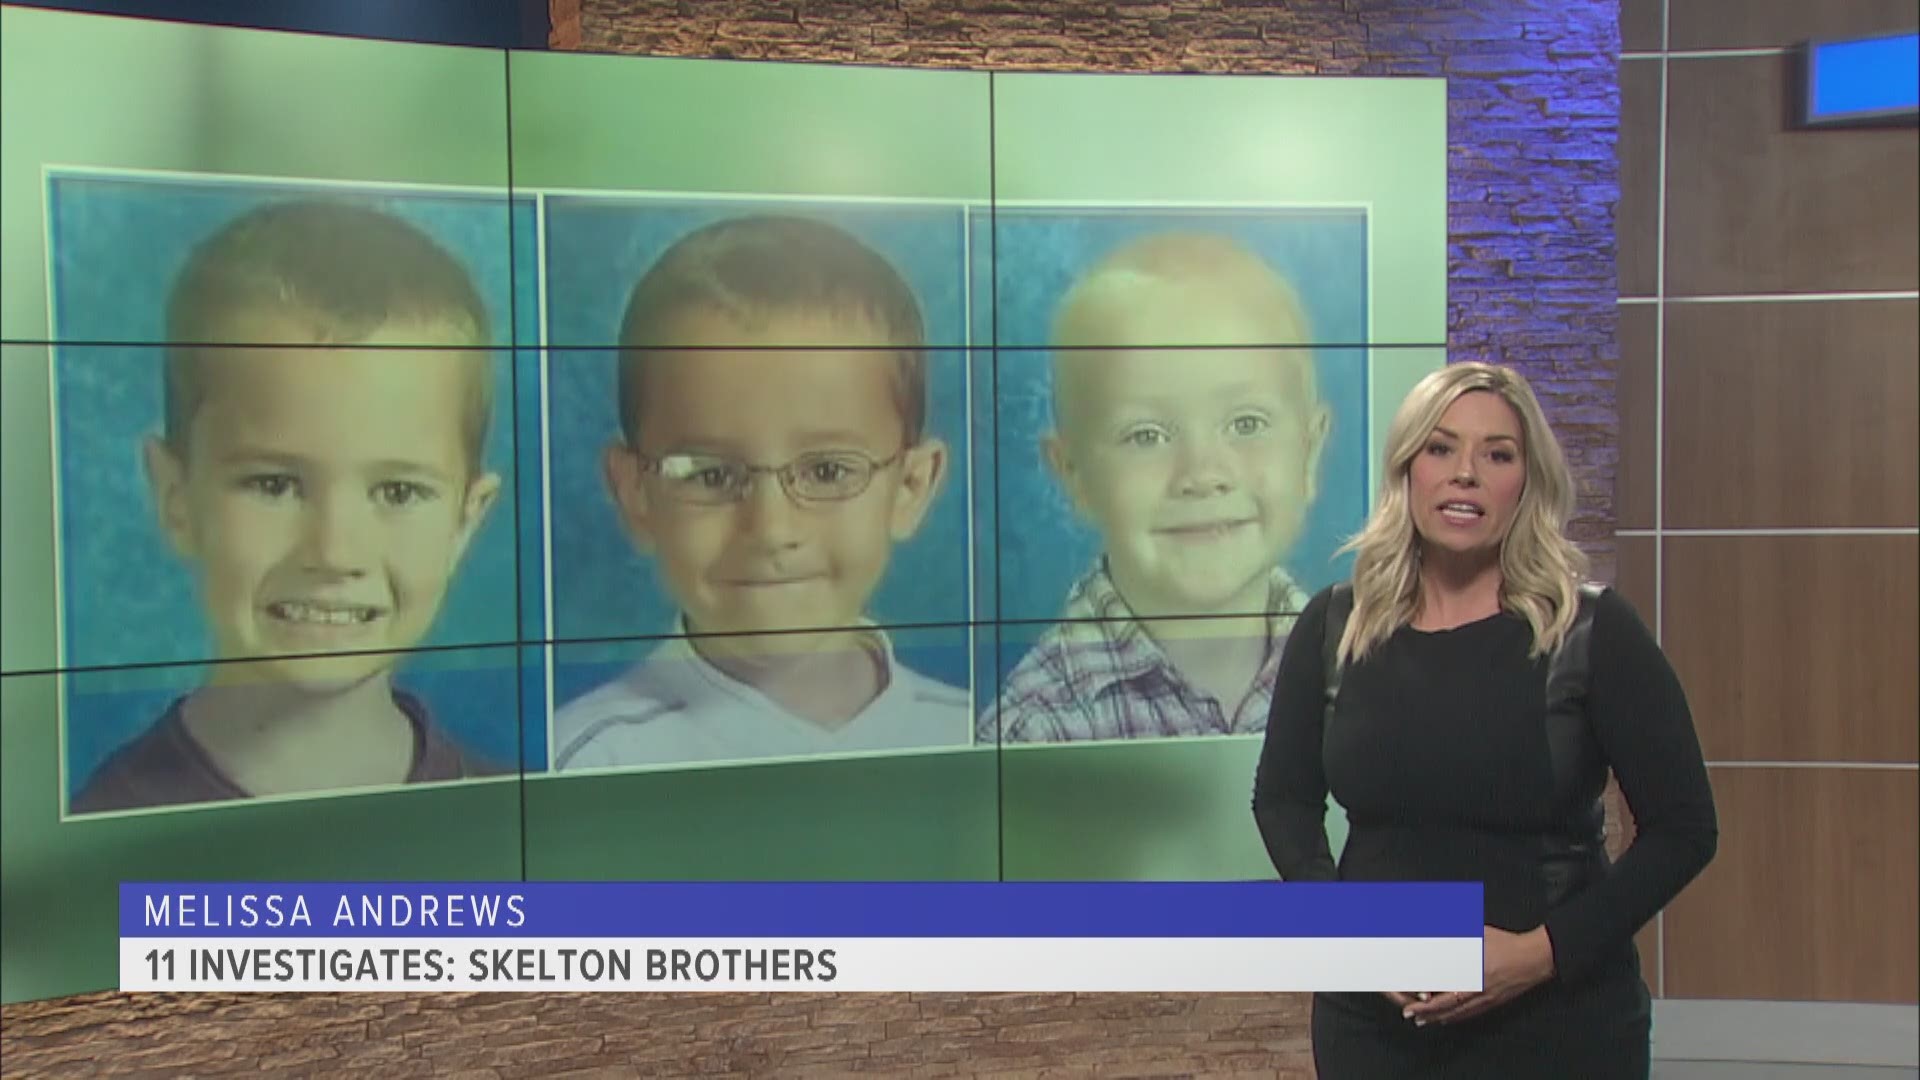 This week marks 10 years since the disappearance of three brothers from our area. Tanner, Alexander and Andrew Skelton would be 15, 17 and 19 years old now.